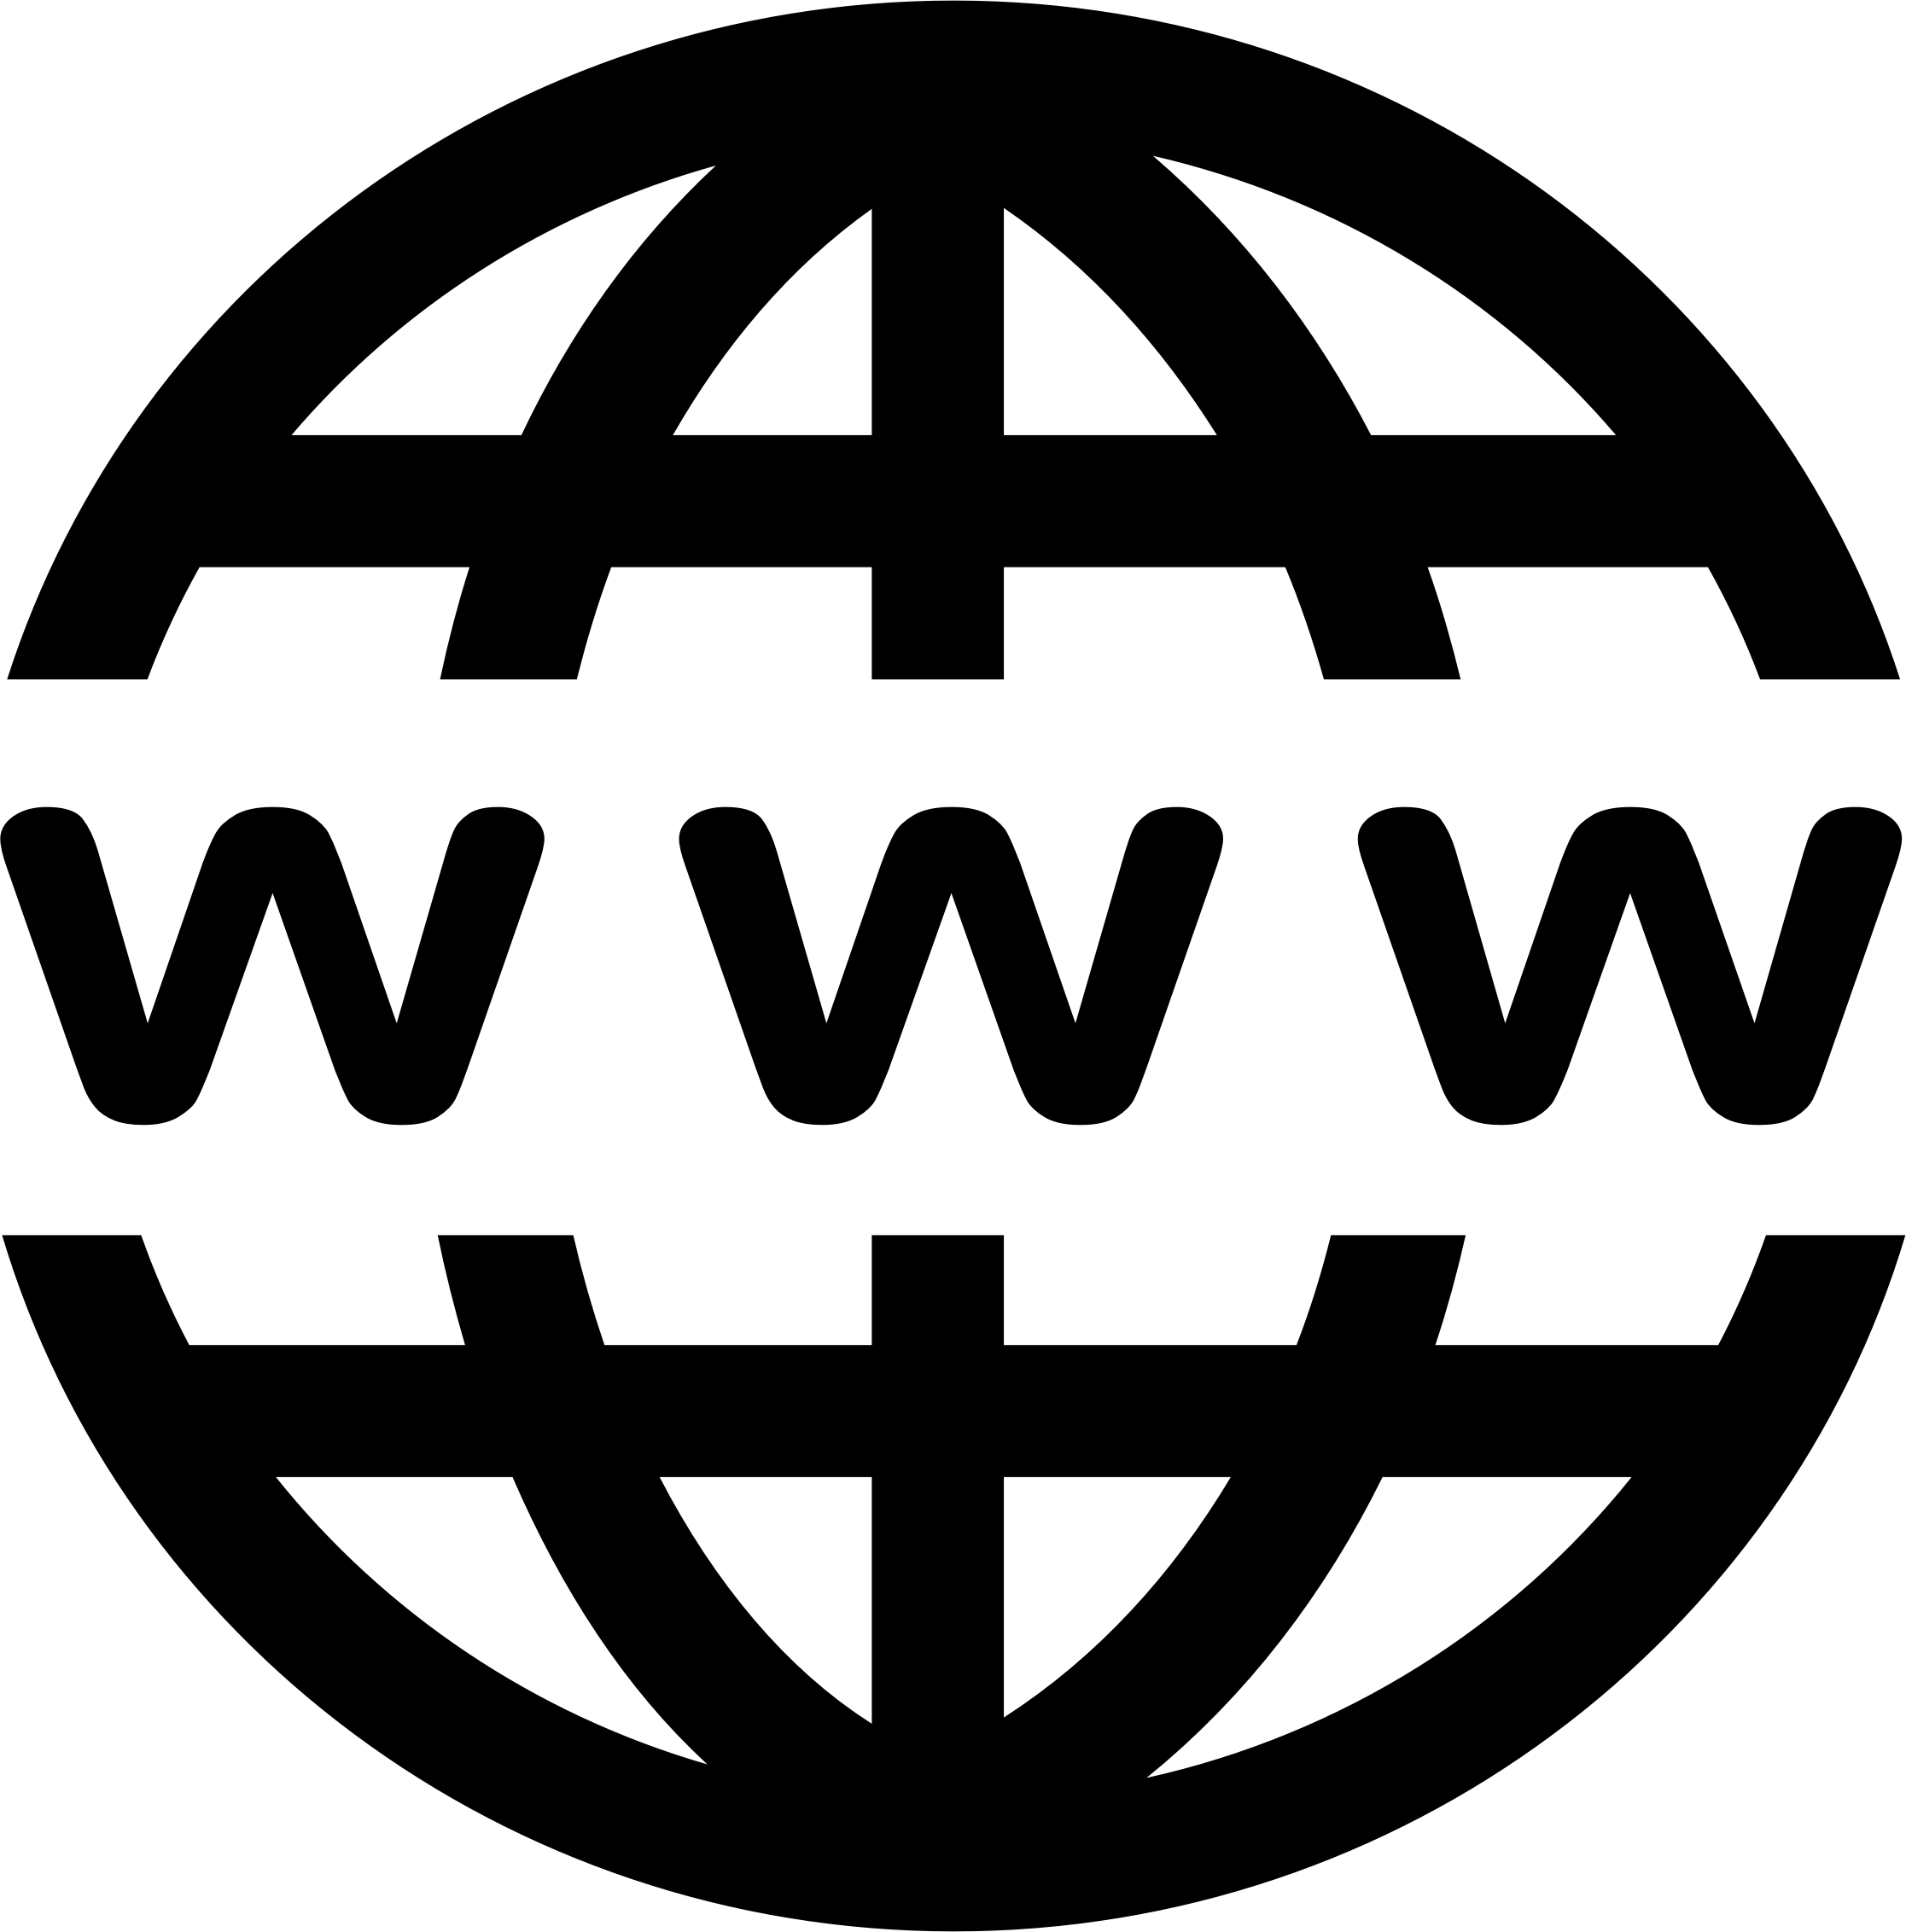 Black and White Internet Logo - World Wide Web | The Internet | Know Your Meme